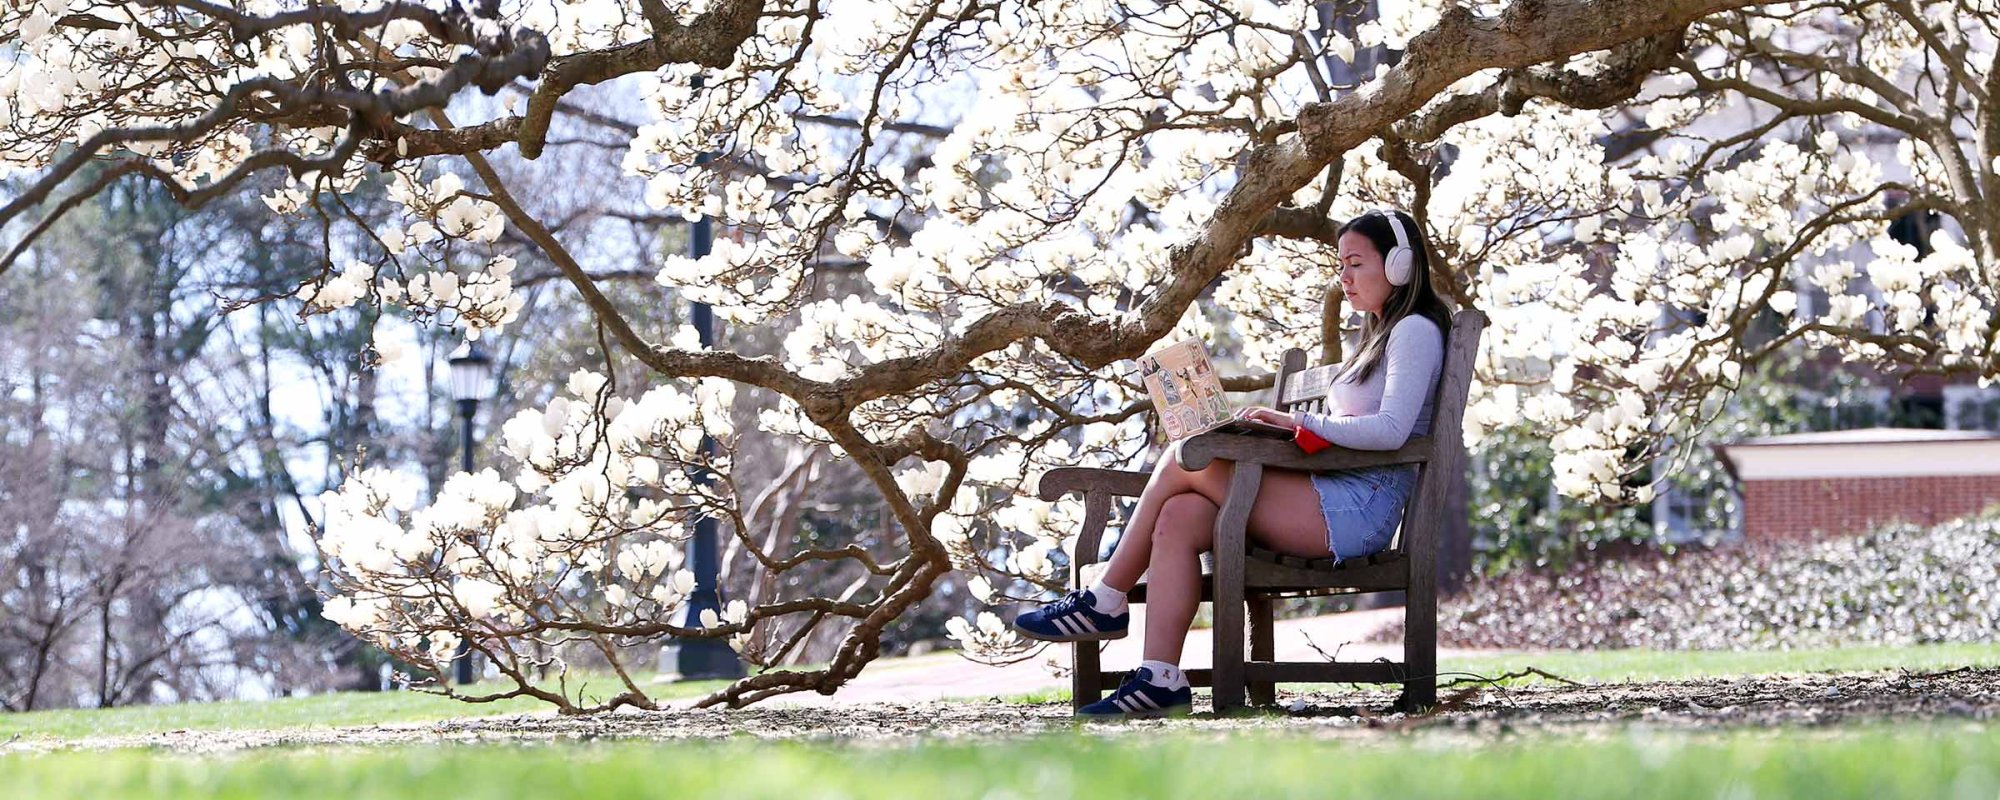 Student on a bench under magnolia tree with white blooms, reading a book